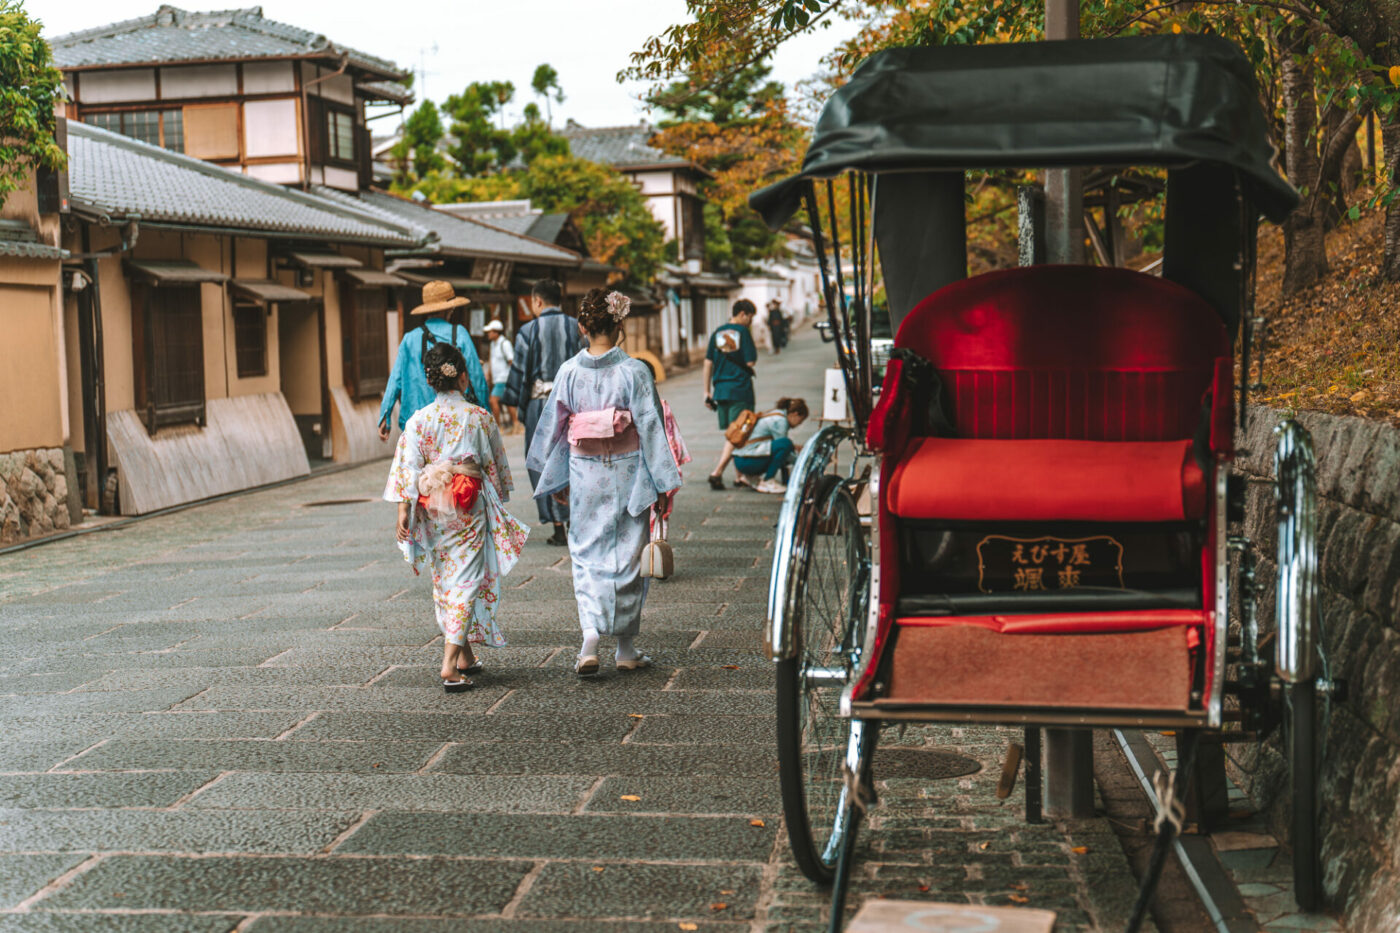 People walking in their kimonos in Gion, Kyoto